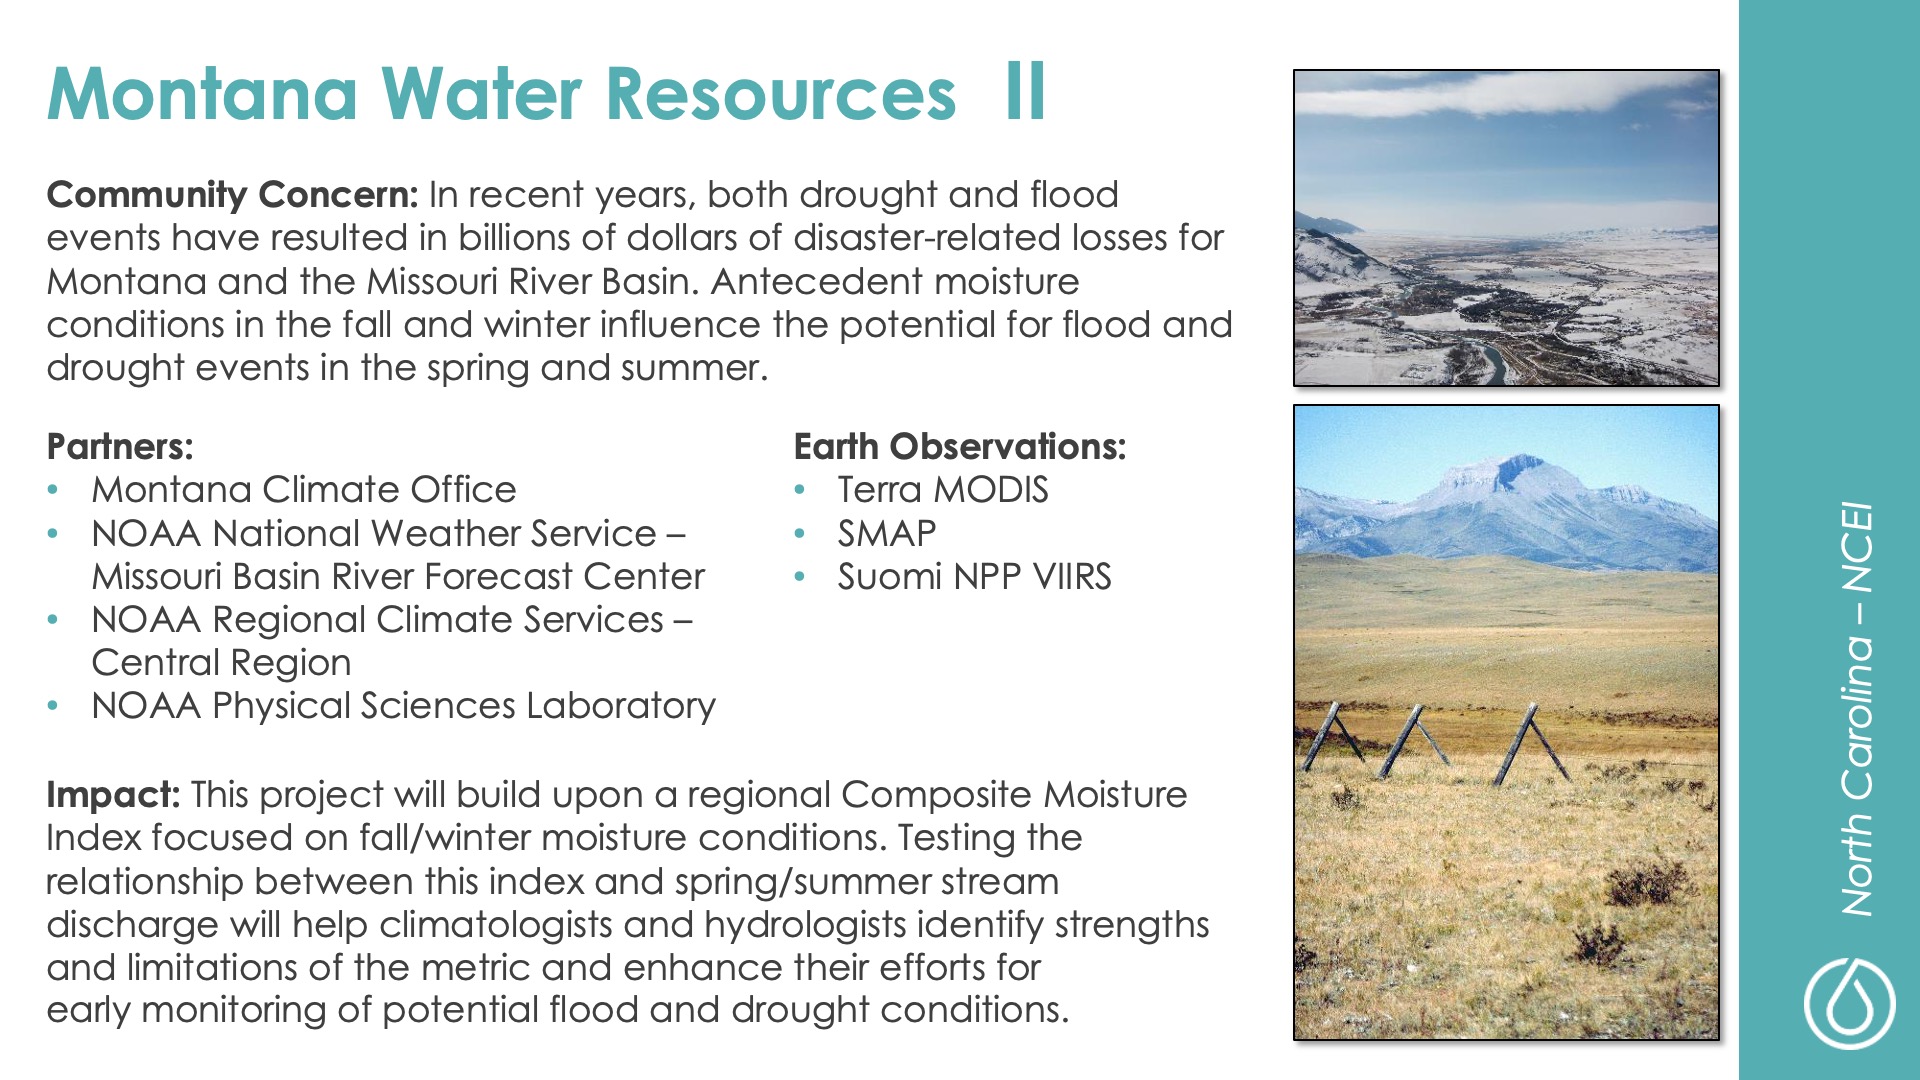 Slide title: Montana Water Resources IIDEVELOP Node: North Carolina - NCEICommunity Concern: In recent years, both drought and flood events have resulted in billions of dollars of disaster-related losses for Montana and the Missouri River Basin. Antecedent moisture conditions in the fall and winter influence the potential for flood and drought events in the spring and summer.Impact: This project will build upon a regional Composite Moisture Index focused on fall/winter moisture conditions. Testing the relationship between this index and spring/summer stream discharge will help climatologists and hydrologists identify strengths and limitations of the metric and enhance their efforts for early monitoring of potential flood and drought conditions.Partners: Montana Climate Office, NOAA National Weather Service – Missouri Basin River Forecast Center, NOAA Regional Climate Services – Central Region, NOAA Physical Sciences LaboratoryEarth Observations: Terra MODIS, SMAP, Suomi NPP VIIRS